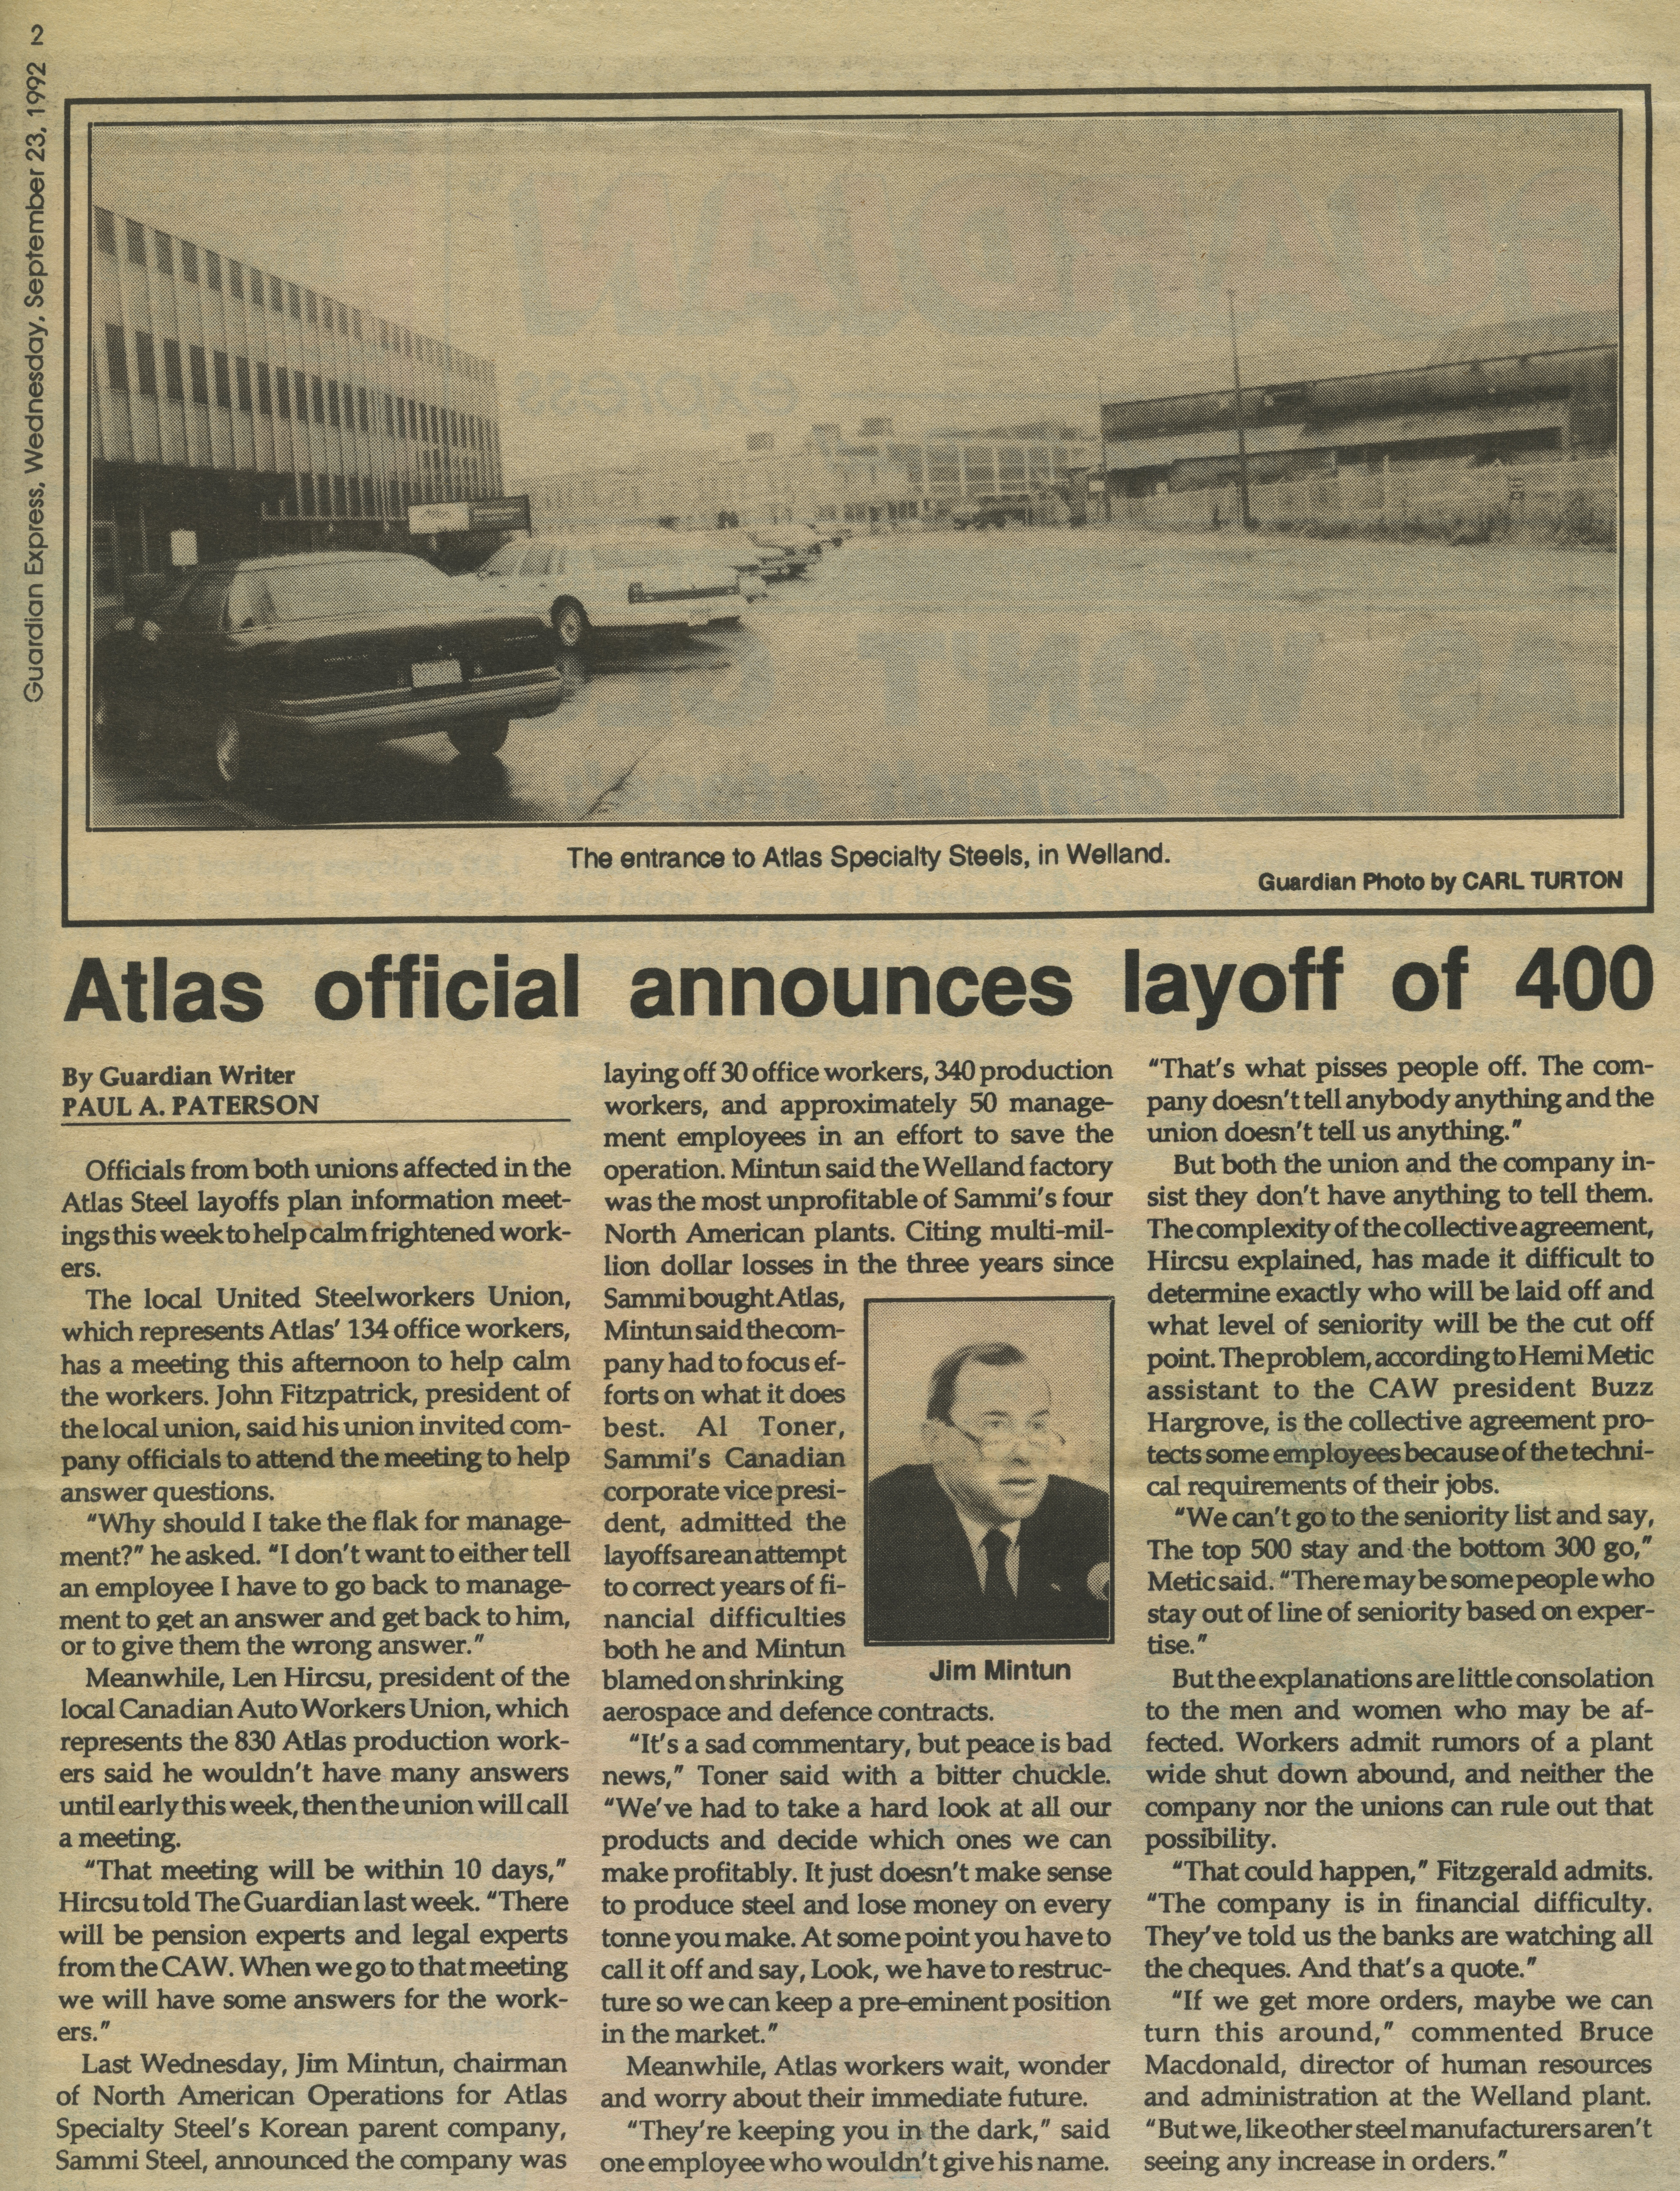 An article titled "Atlas official announces layoff of 400."